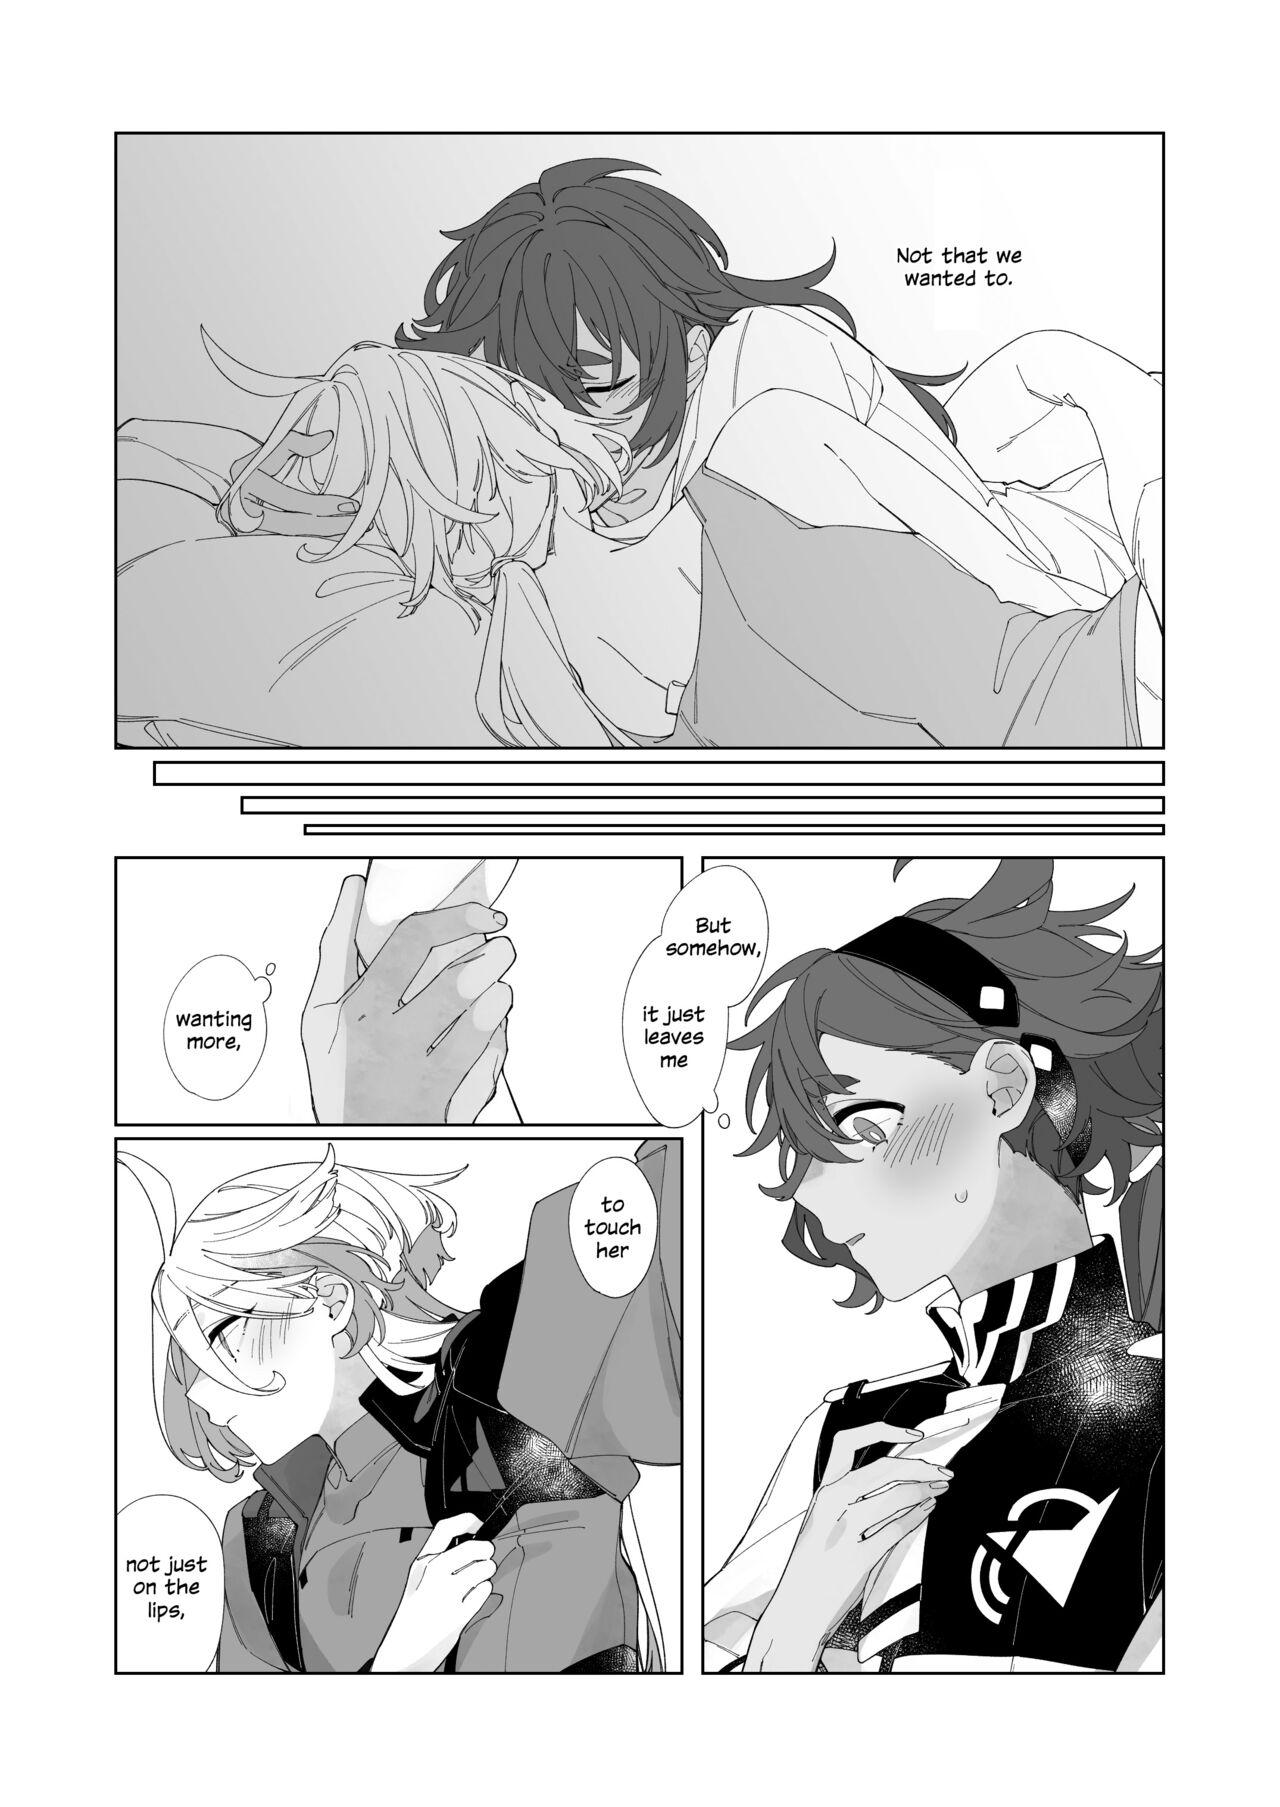 Hardcore Gay Kiss no Ato Nani ga Shitai? | After Kissing, What Else Do You Want to Do? - Mobile suit gundam the witch from mercury HD - Page 9